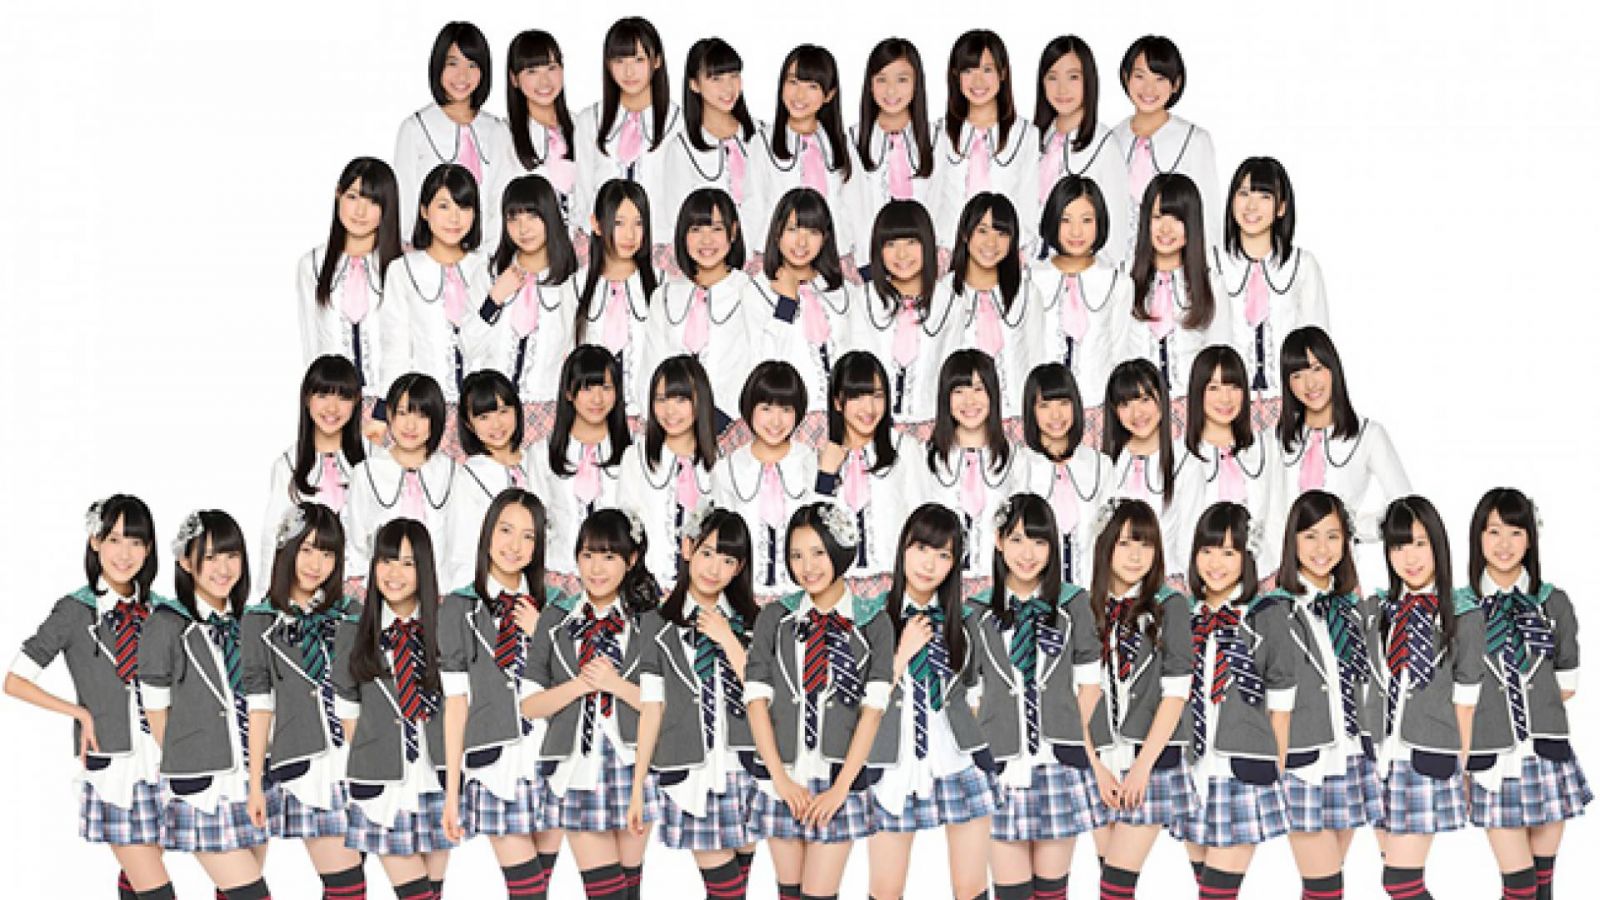 Nouveau single pour HKT48 © Universal Music Japan, all rights reserved